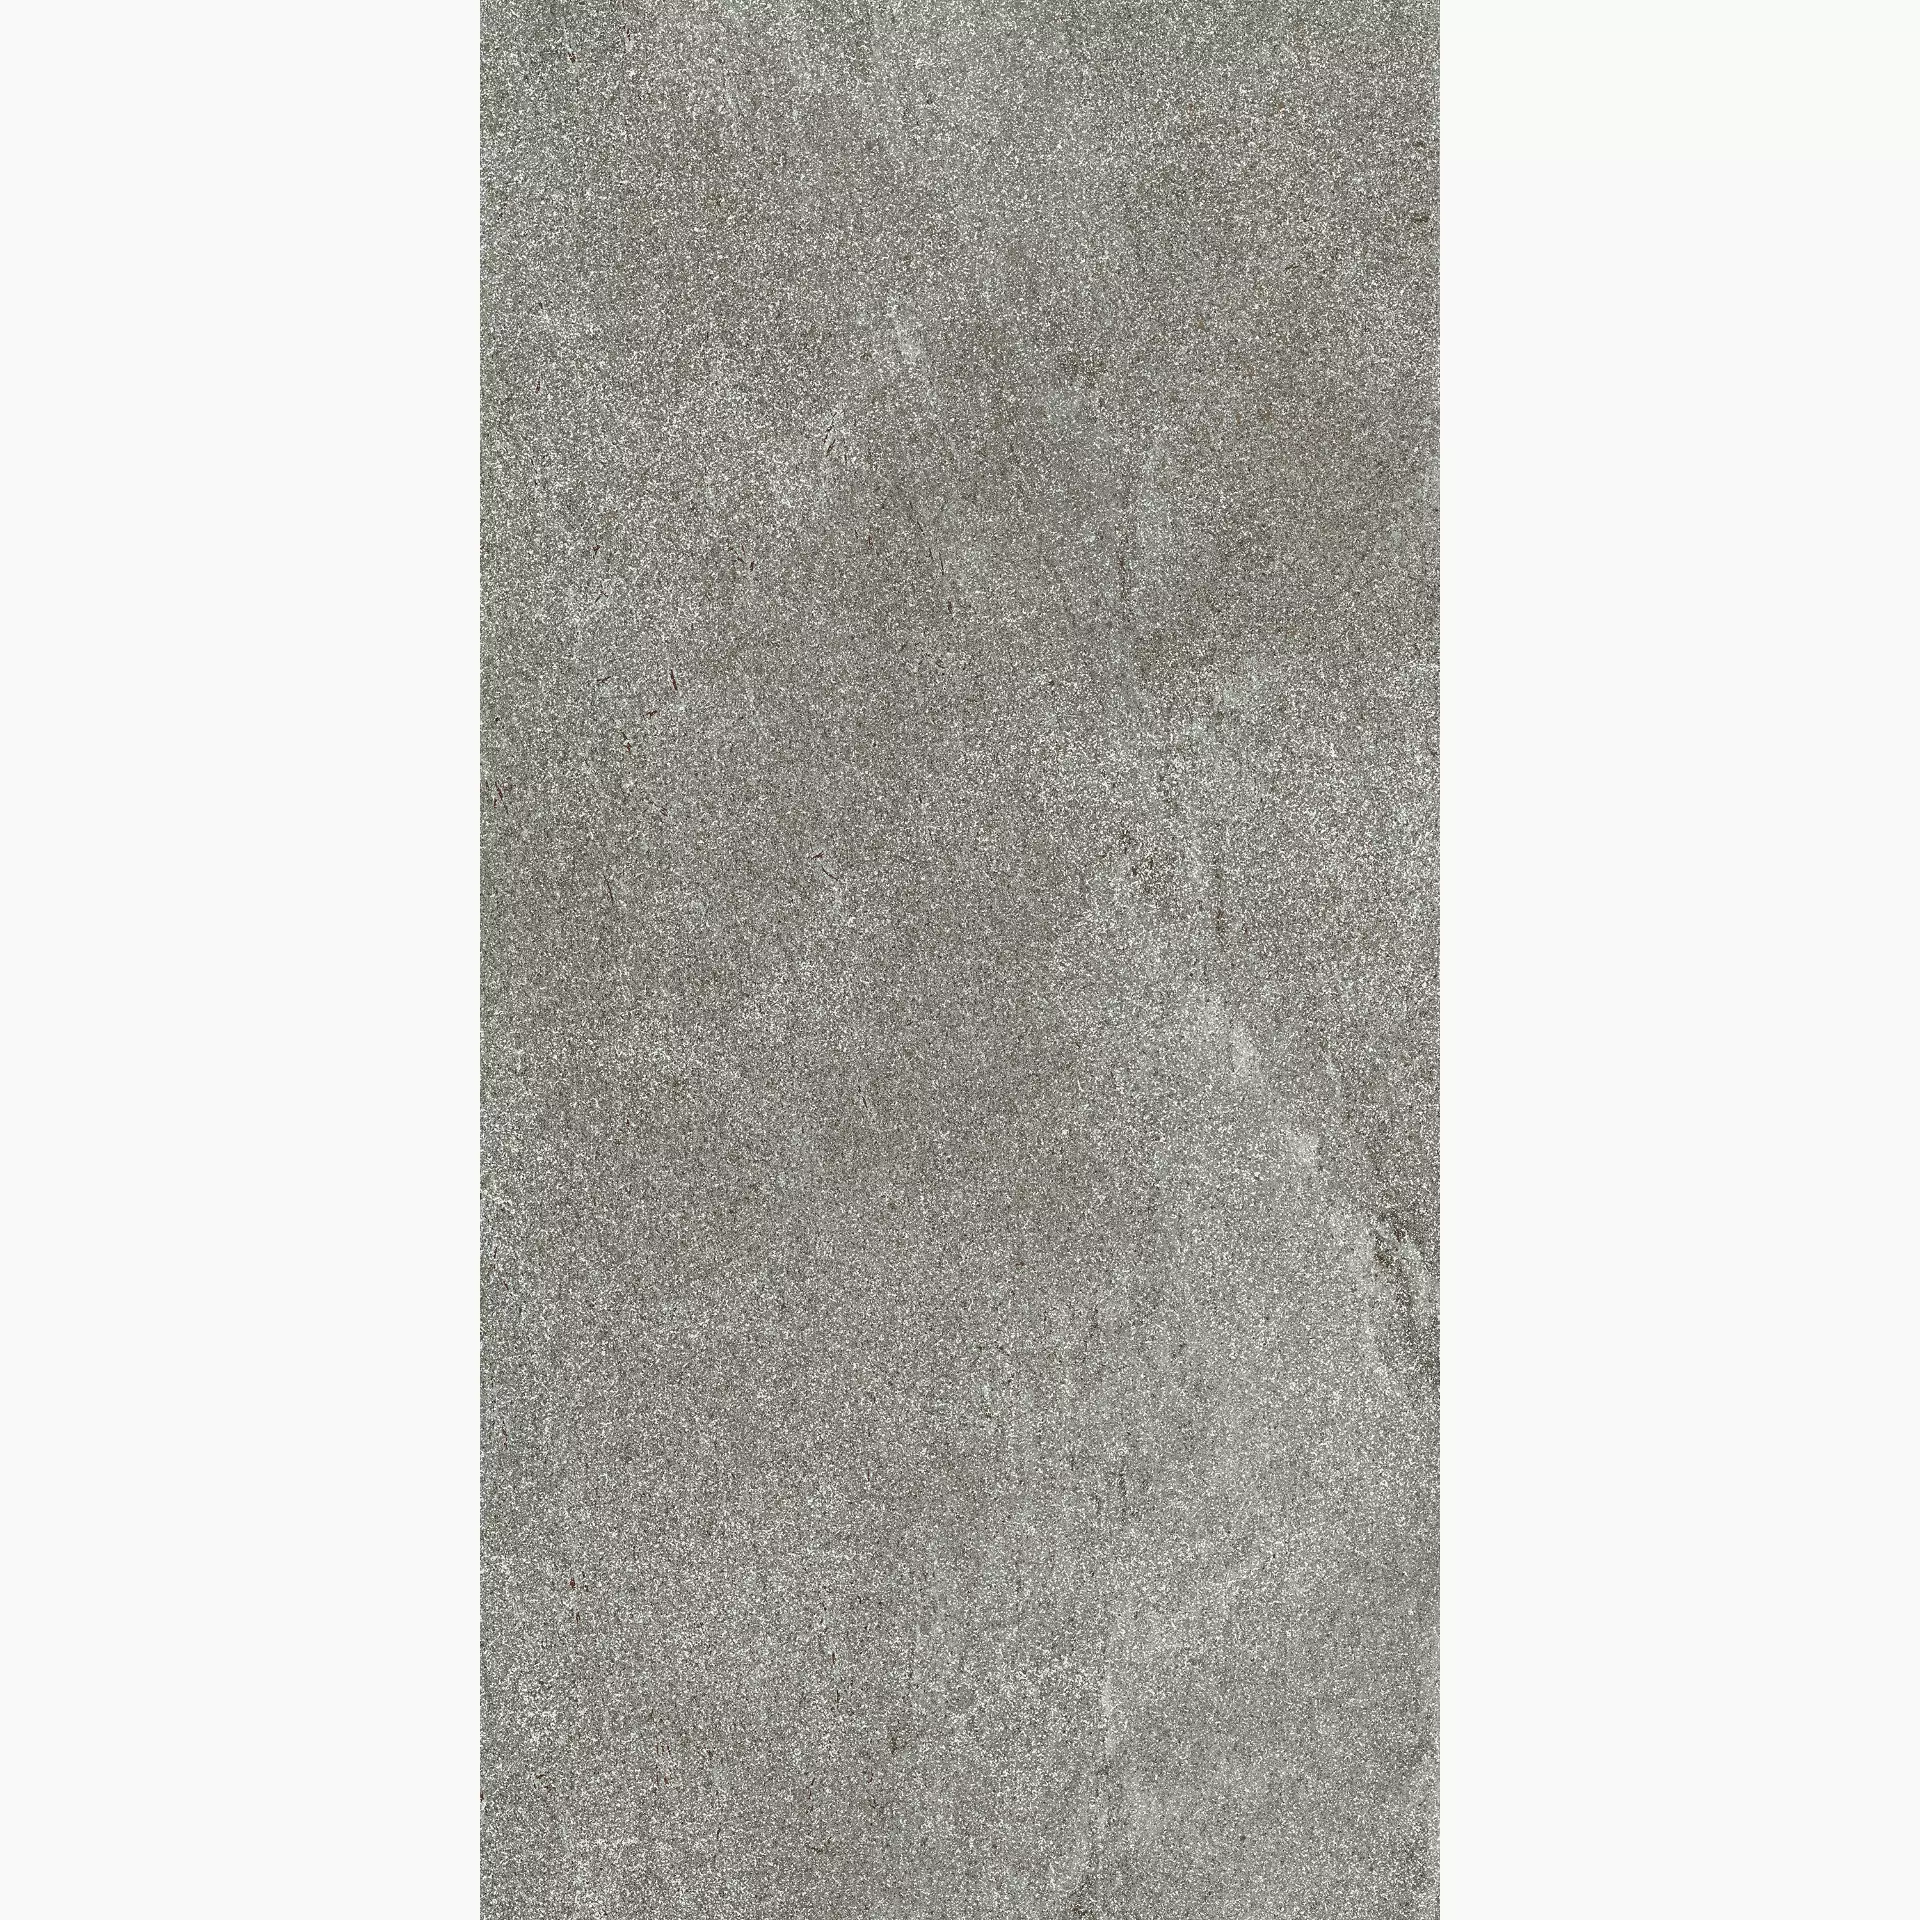 Cottodeste Blend Stone Mid Hammered Protect EGXBS80 60x120cm rectified 20mm